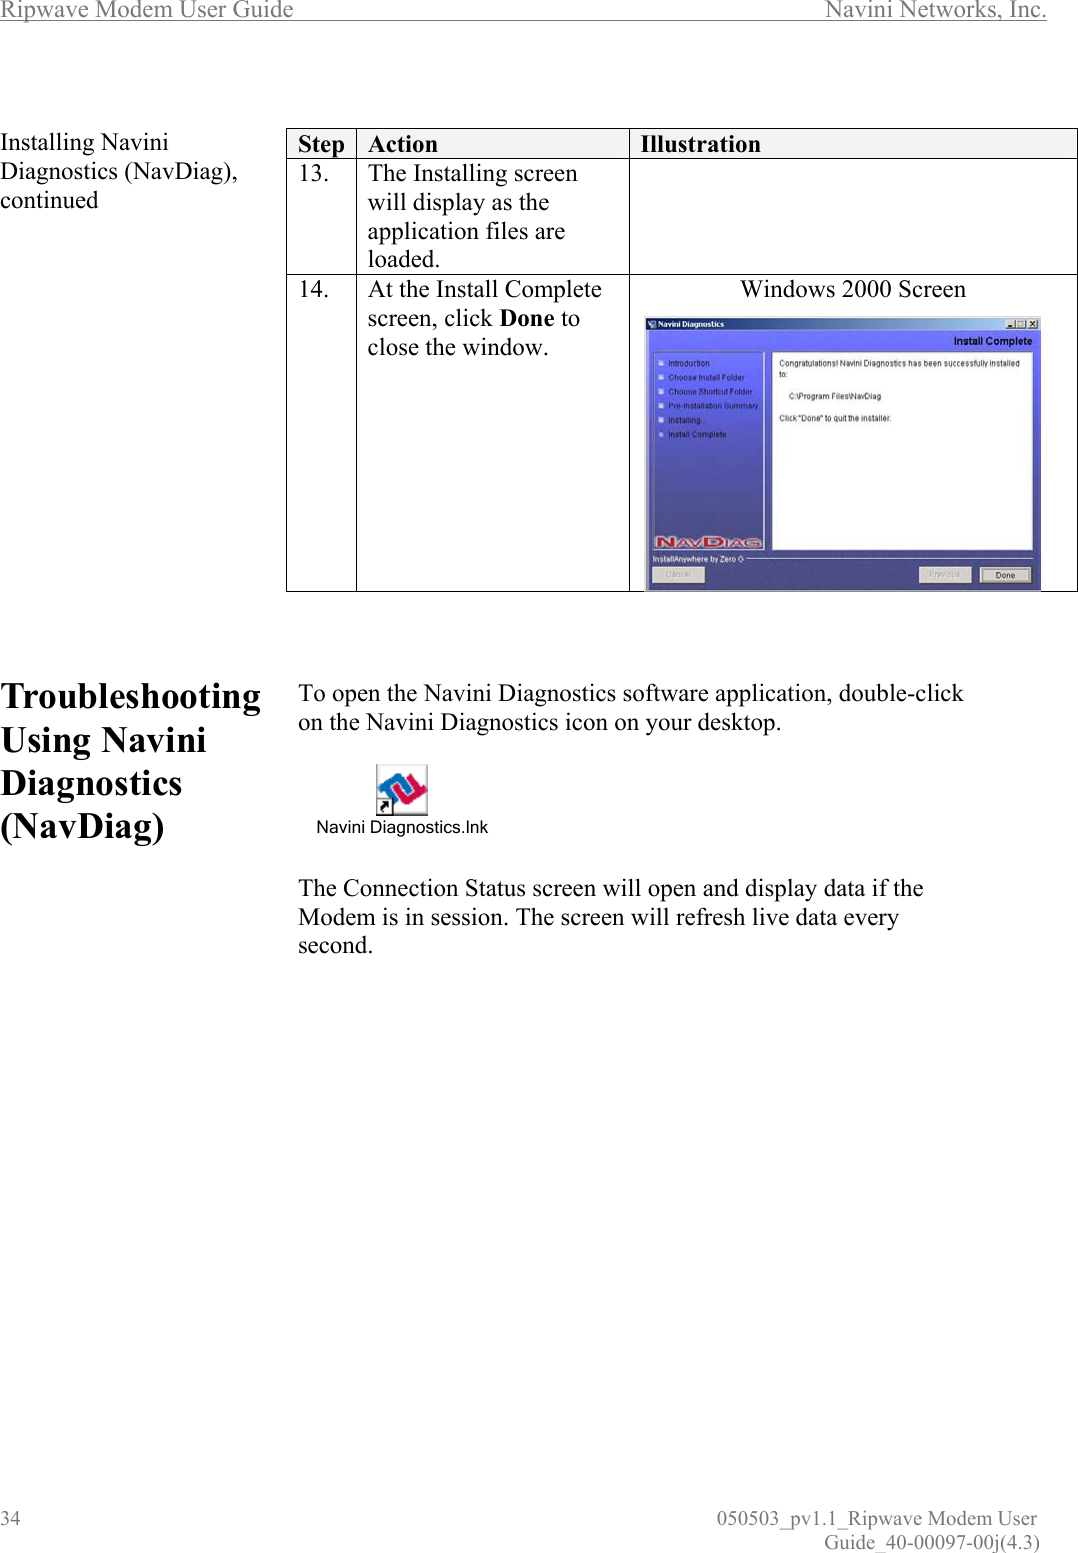 Ripwave Modem User Guide        Navini Networks, Inc. 34                          050503_pv1.1_Ripwave Modem User                                                                                                                                                               Guide_40-00097-00j(4.3)  Installing Navini Diagnostics (NavDiag), continued                 Troubleshooting Using Navini Diagnostics (NavDiag)                      Step  Action  Illustration 13.   The Installing screen will display as the application files are loaded.  14.  At the Install Complete screen, click Done to close the window.   Windows 2000 Screen     To open the Navini Diagnostics software application, double-click on the Navini Diagnostics icon on your desktop.   Navini Diagnostics.lnk   The Connection Status screen will open and display data if the Modem is in session. The screen will refresh live data every second.                 